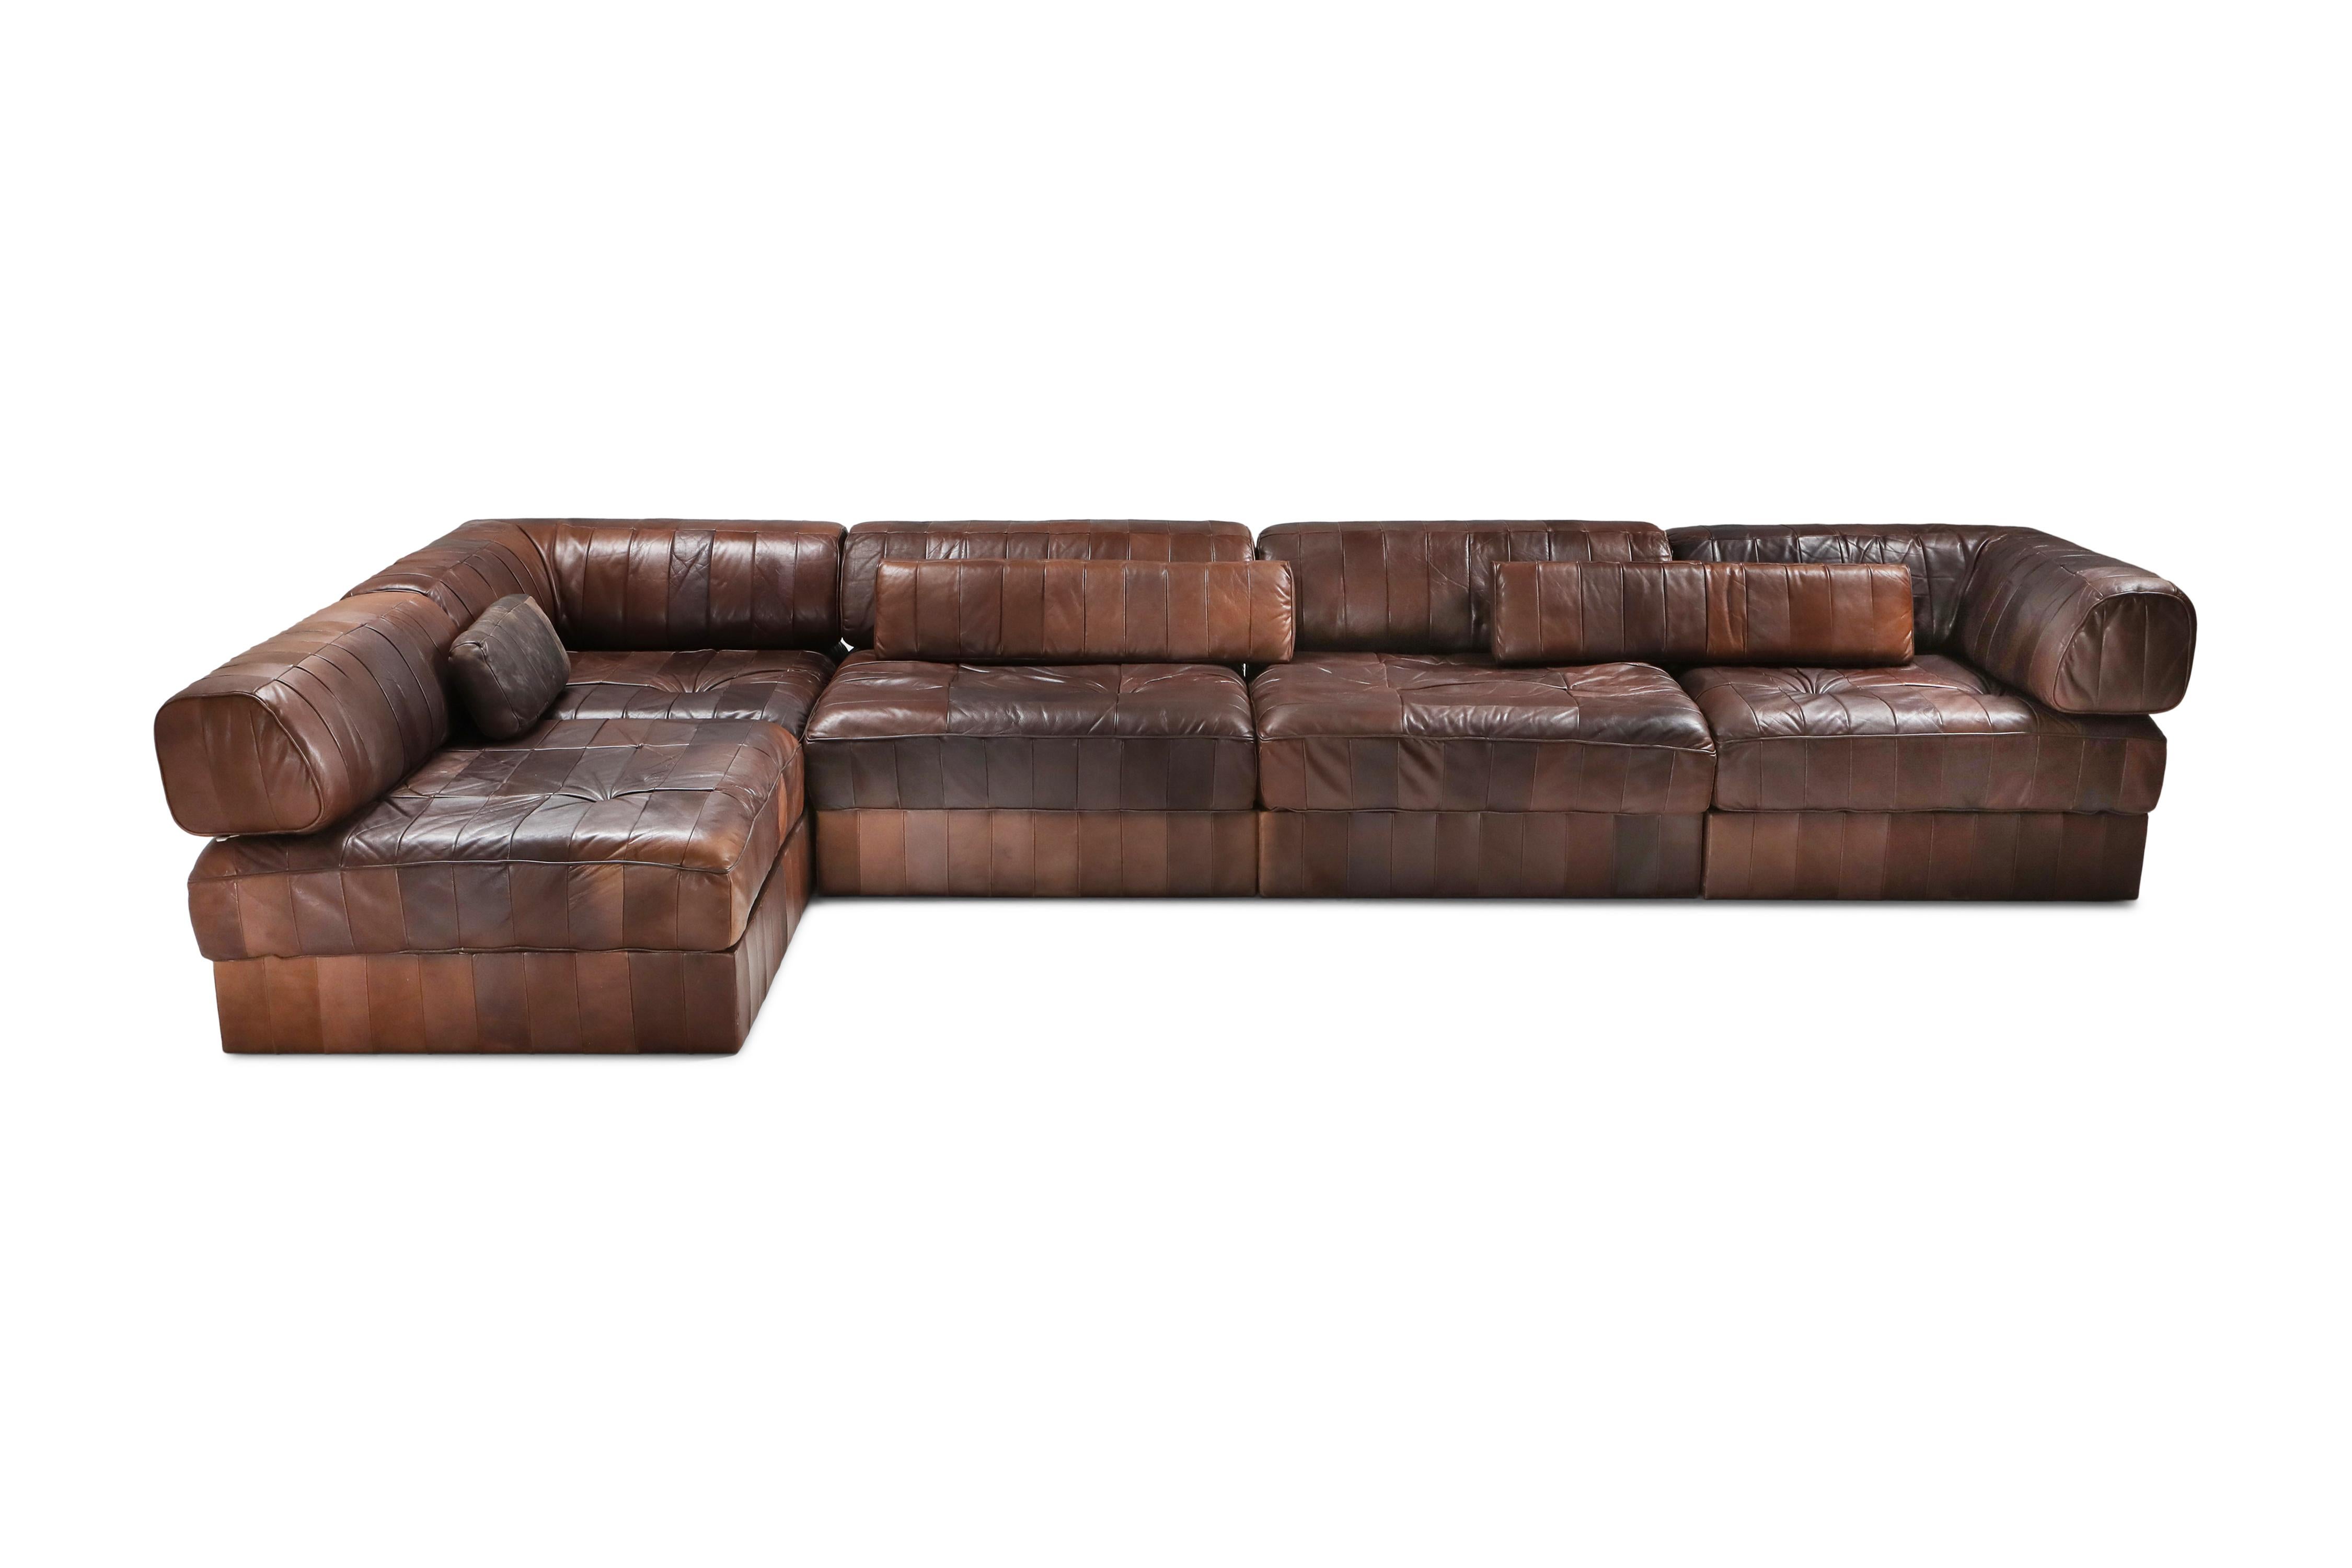 De Sede, modular sectional couch, DS-88, brown patchwork leather

Hand built in the 1970s to incredibly high standards by De Sede craftsman in Switzerland. Made of five sections, each with a base leather patchwork cushion and a back cushion made